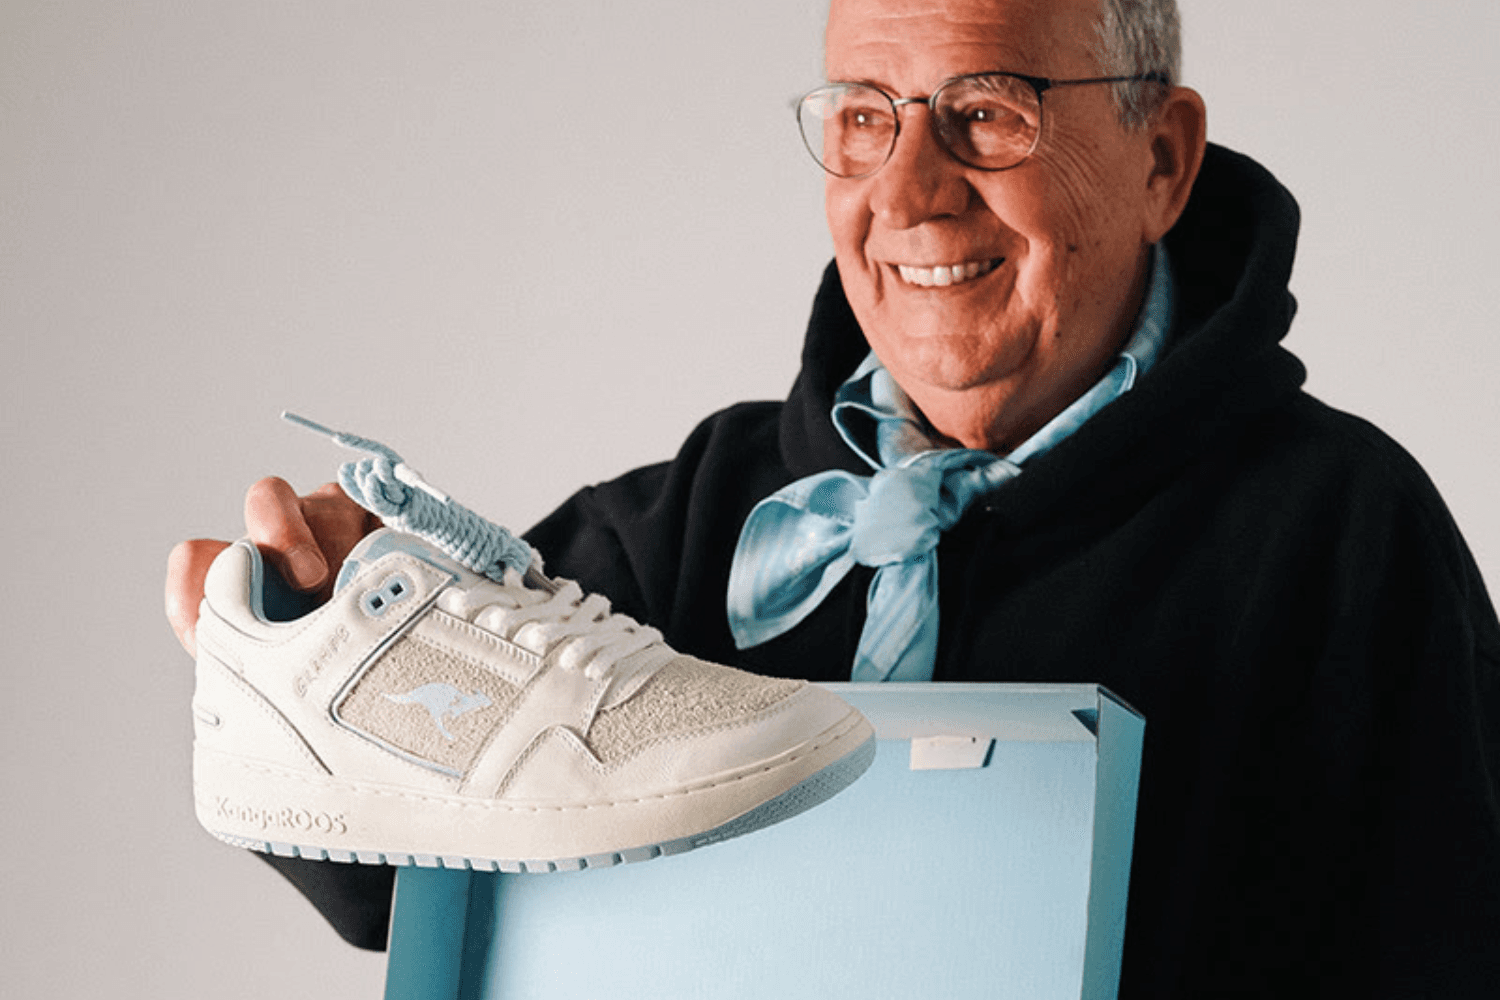 KangaROOS joins hands with German style icon Gramps